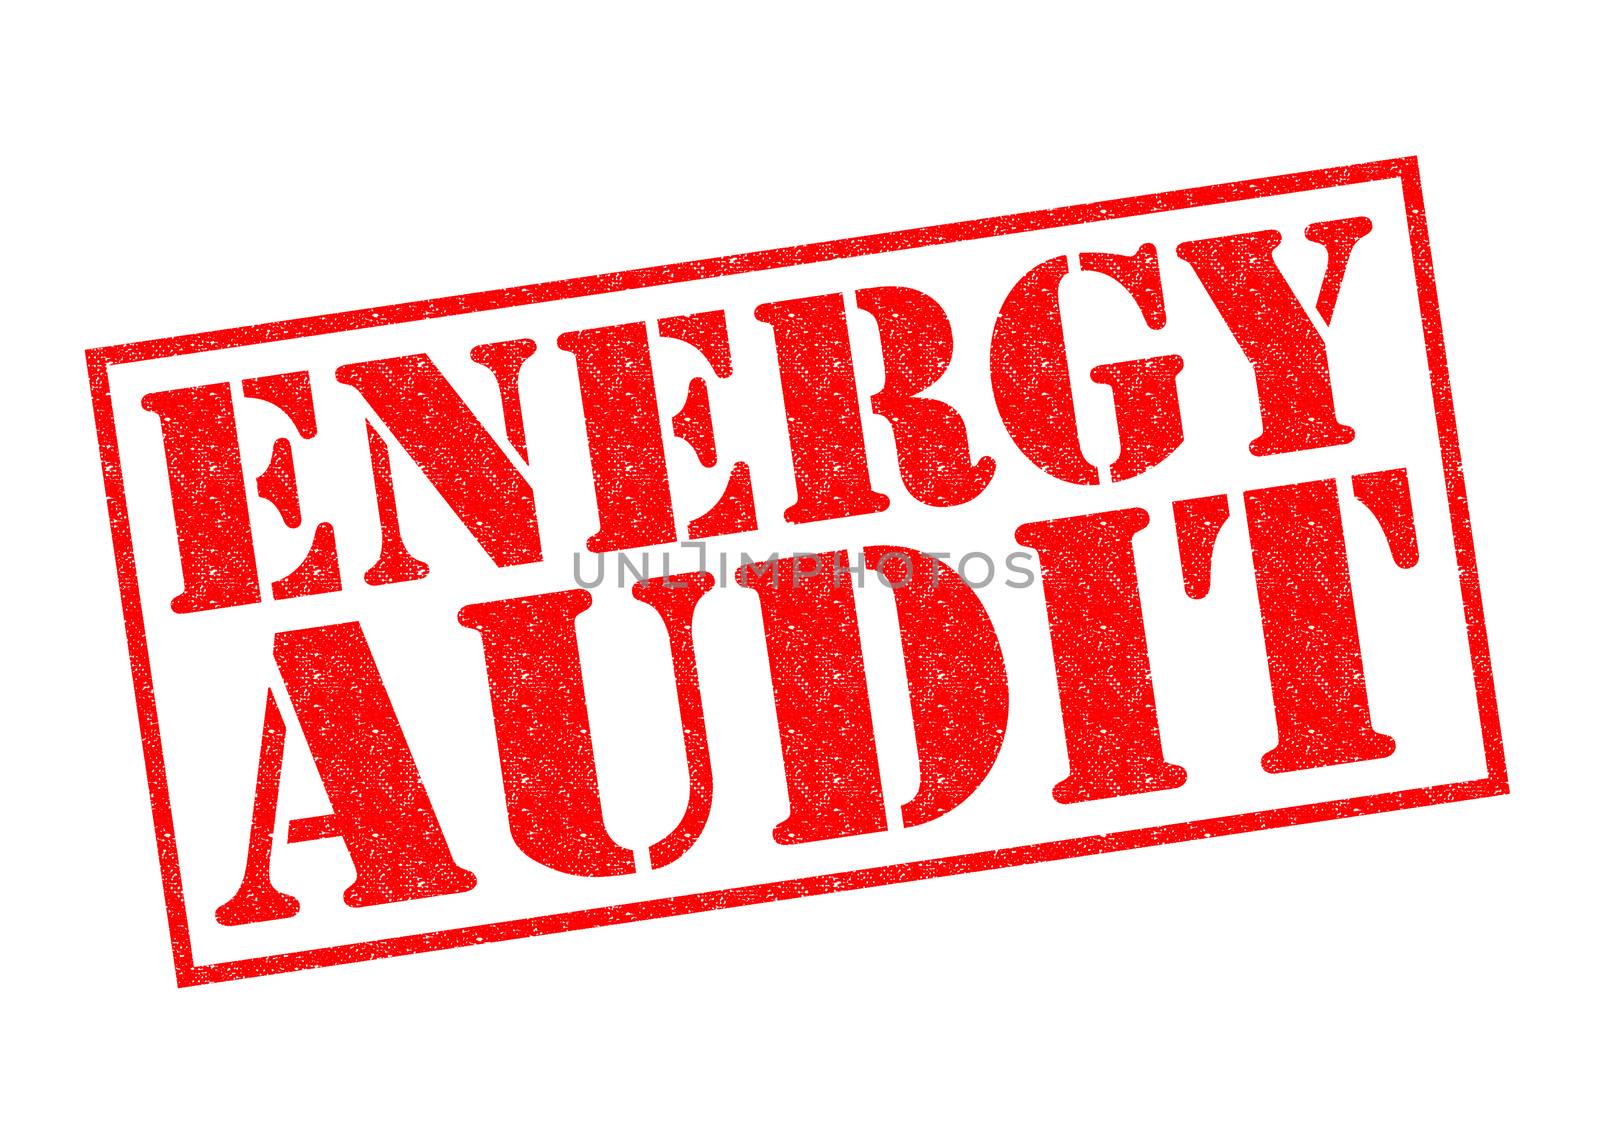 ENERGY AUDIT red Rubber Stamp over a white background.